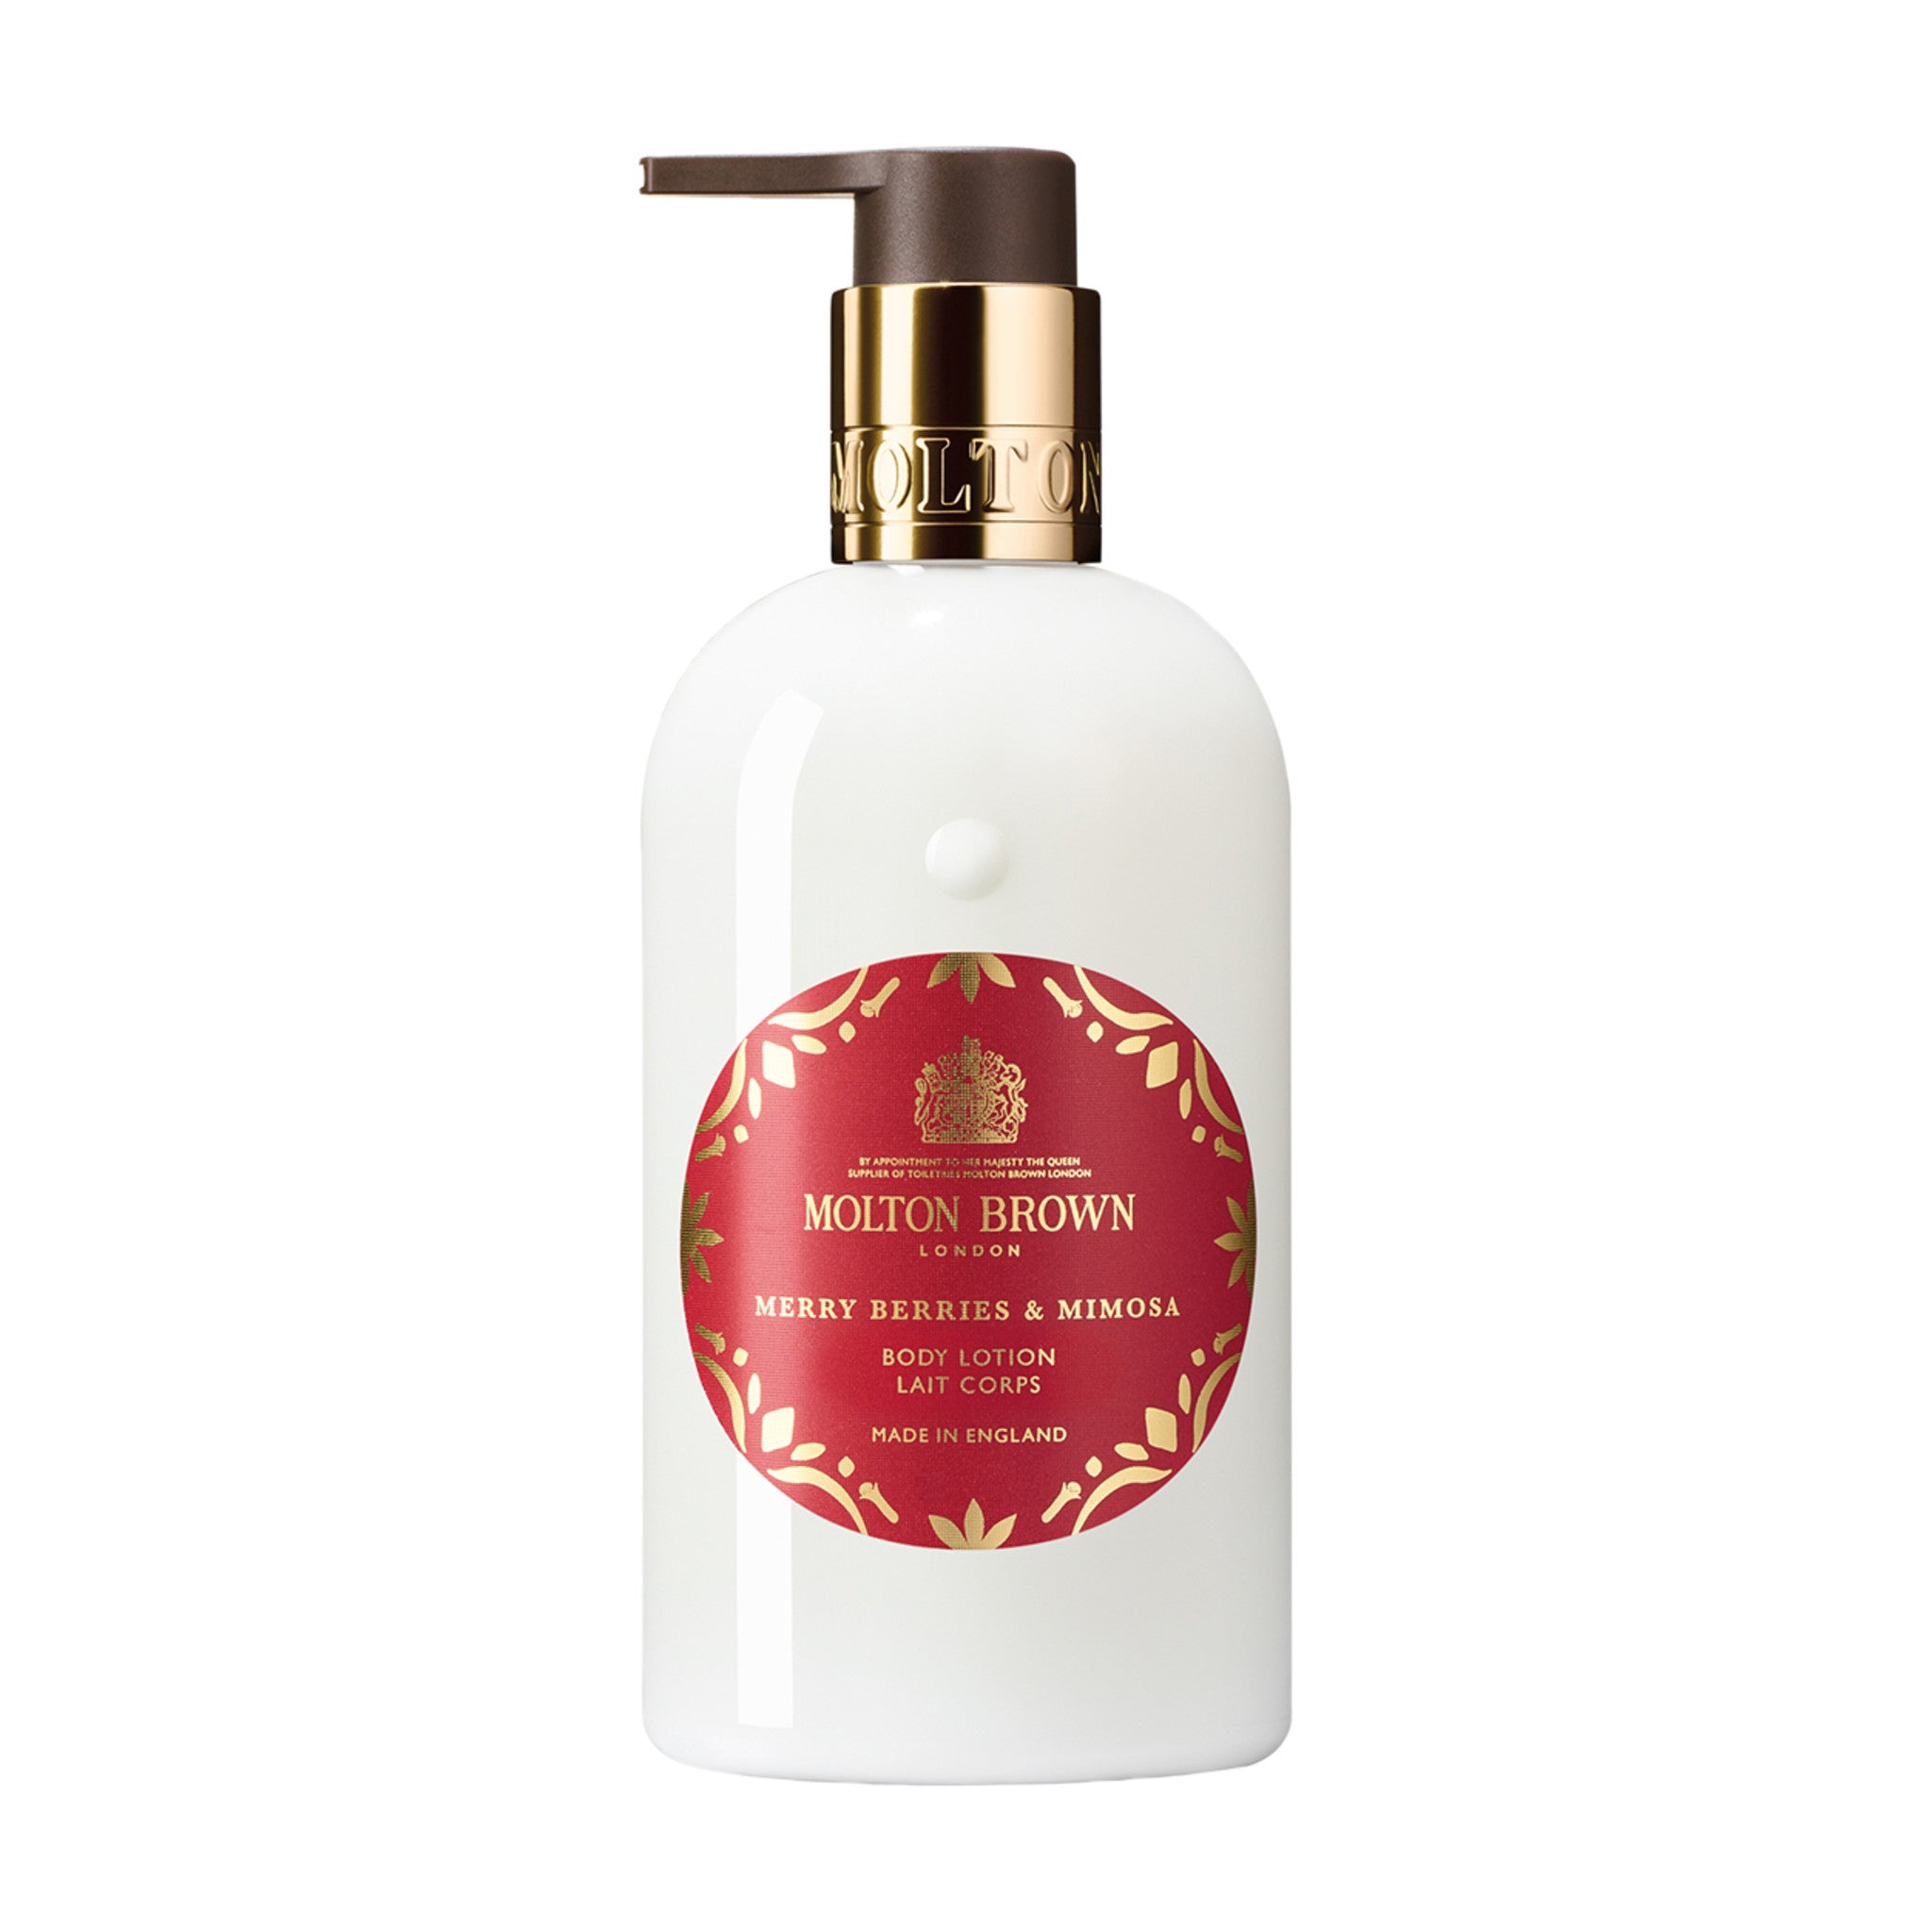 Molton Brown Merry Berries and Mimosa Body Lotion (Limited Edition) main image.